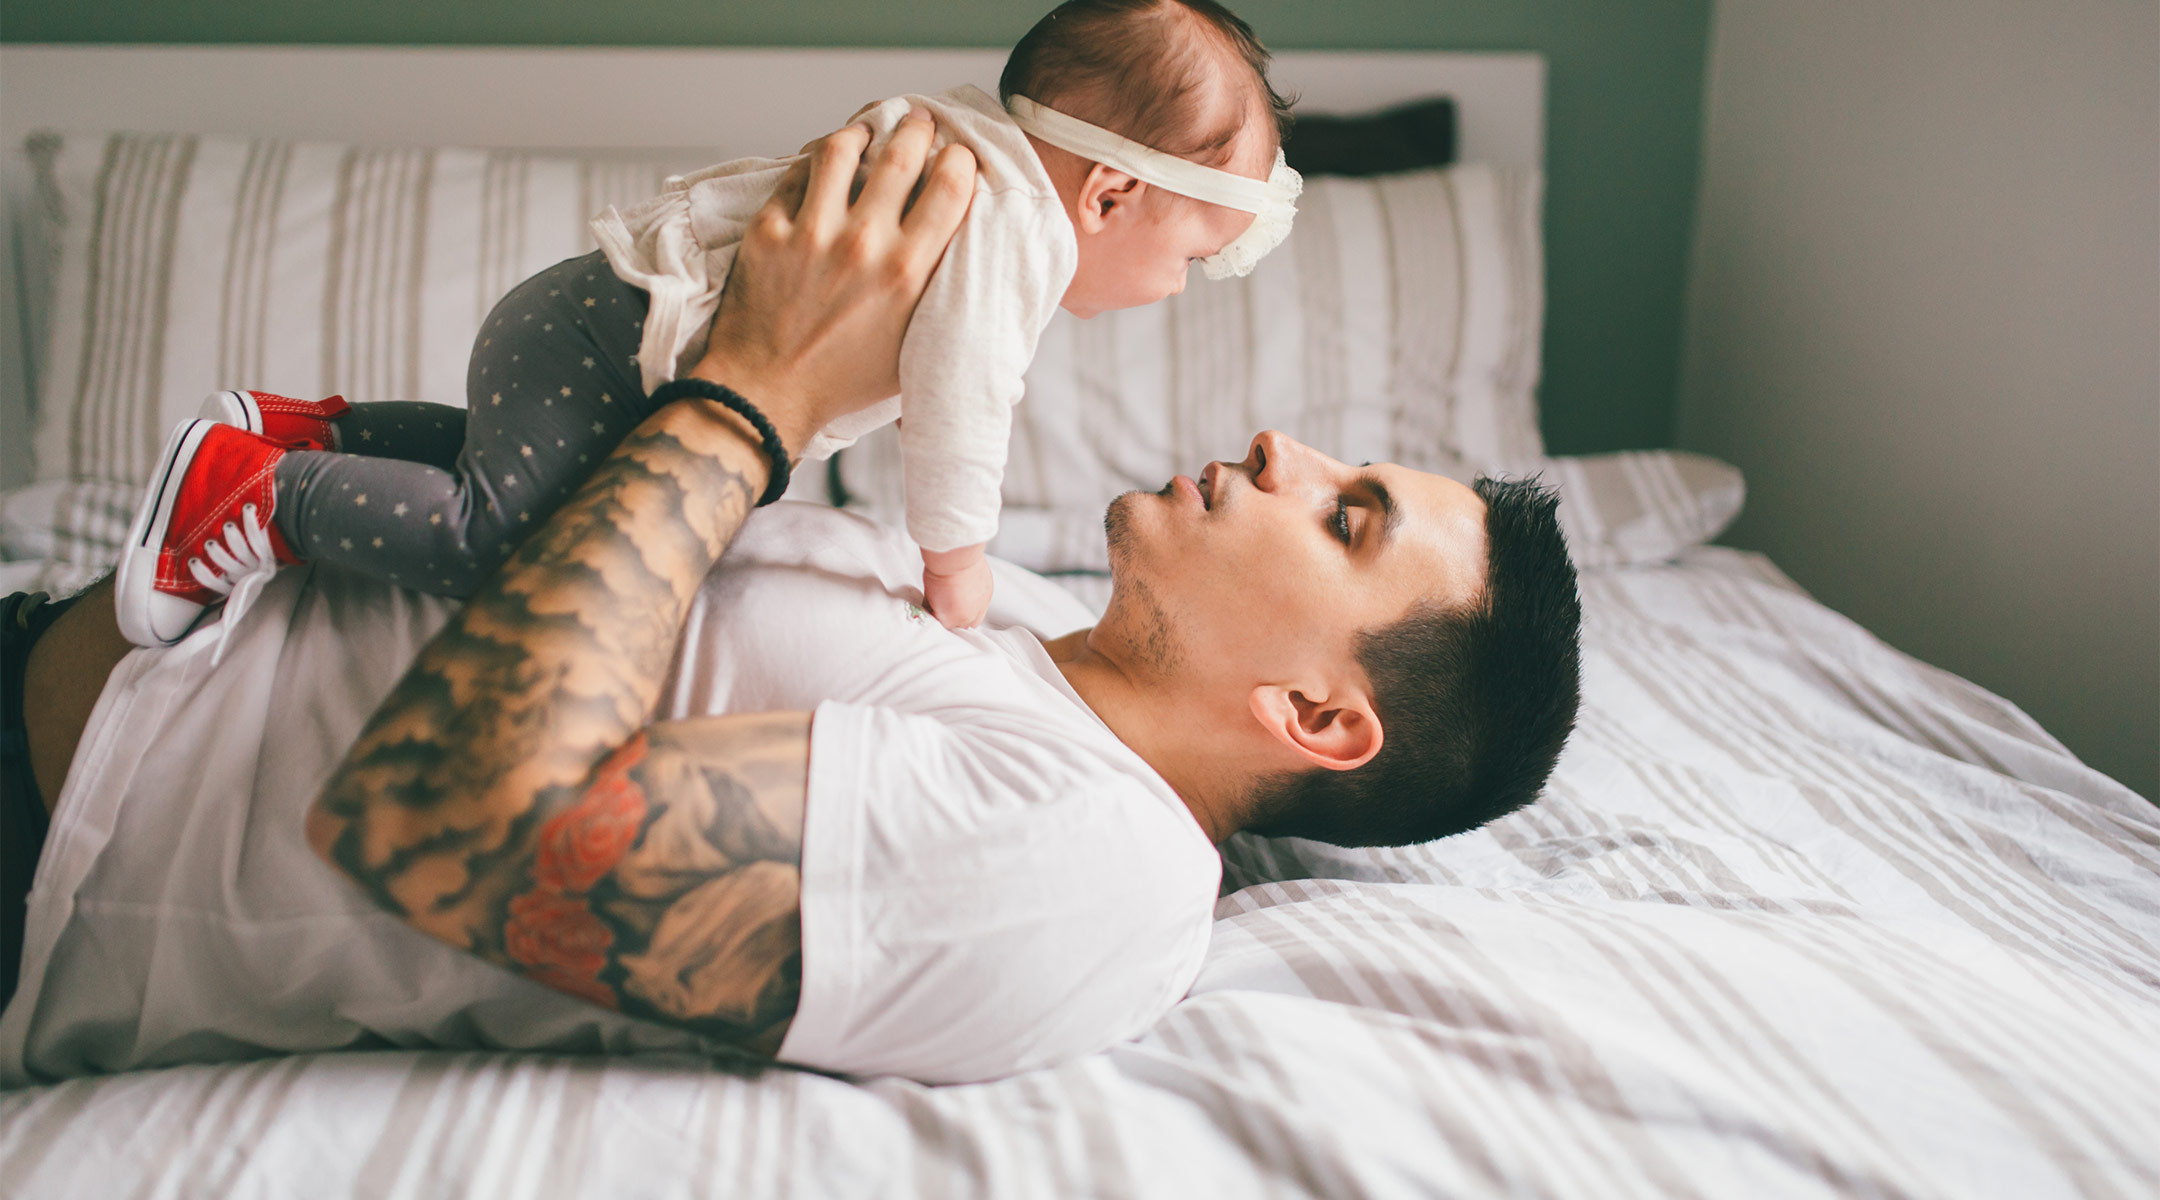 dad holding and bonding with his newborn baby daughter in bed